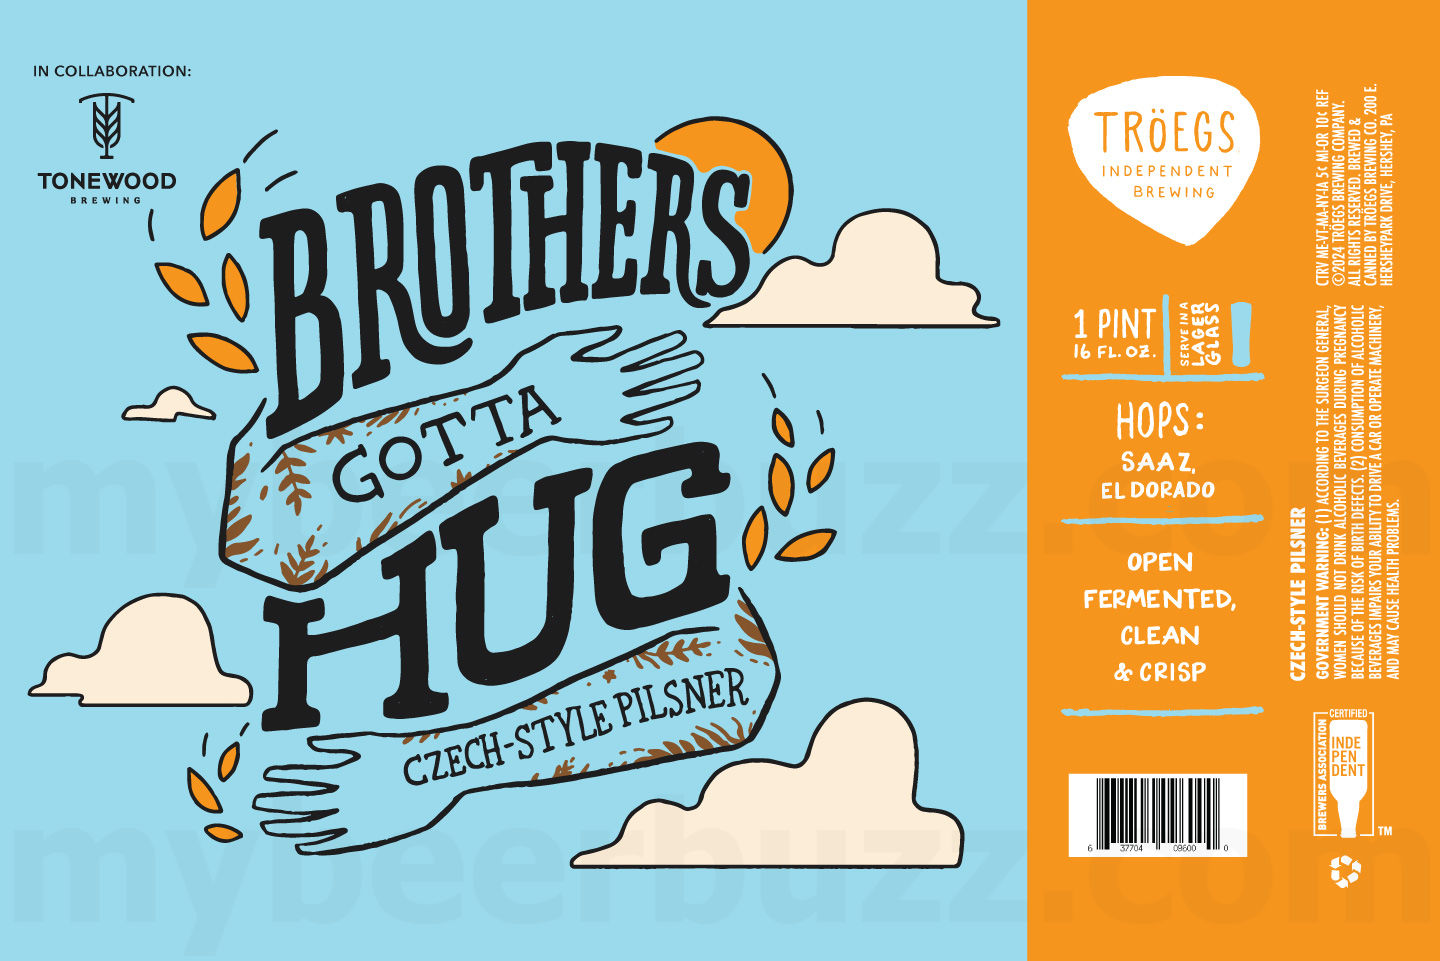 Tröegs & Tonewood Collaborate On Brothers Got to Hug